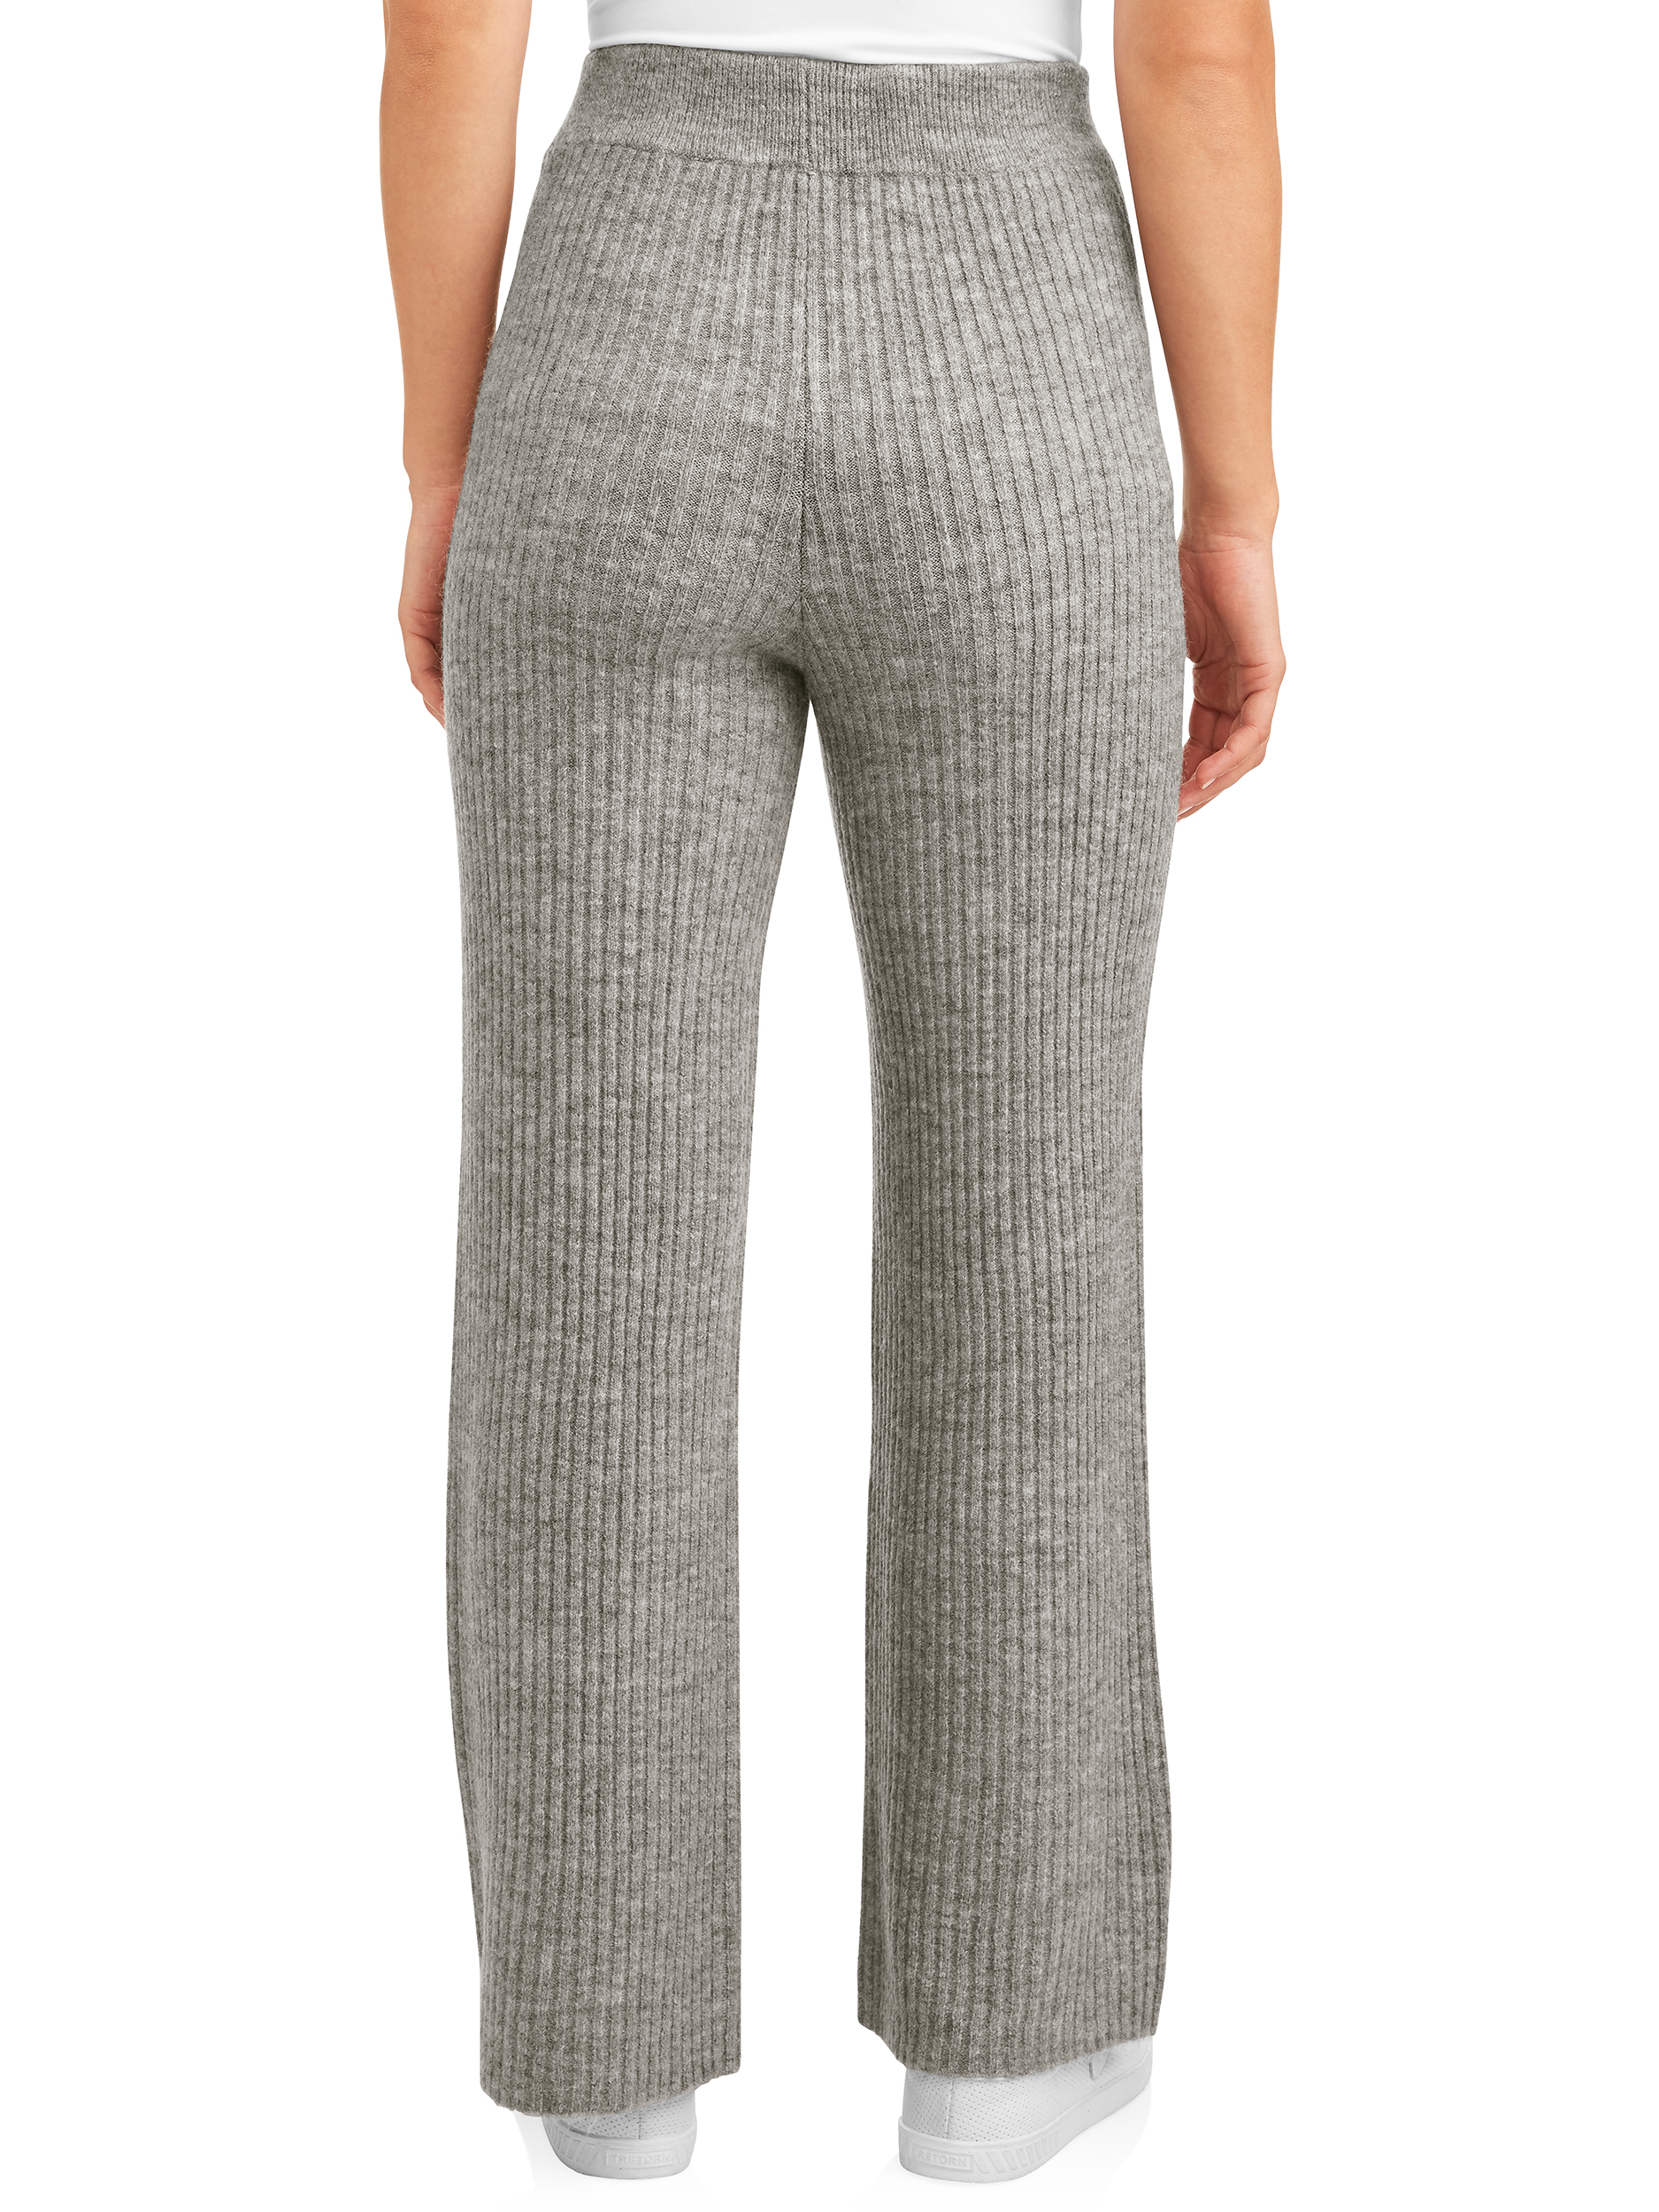 Time and Tru Cozy Knit Pant Women's - image 2 of 5